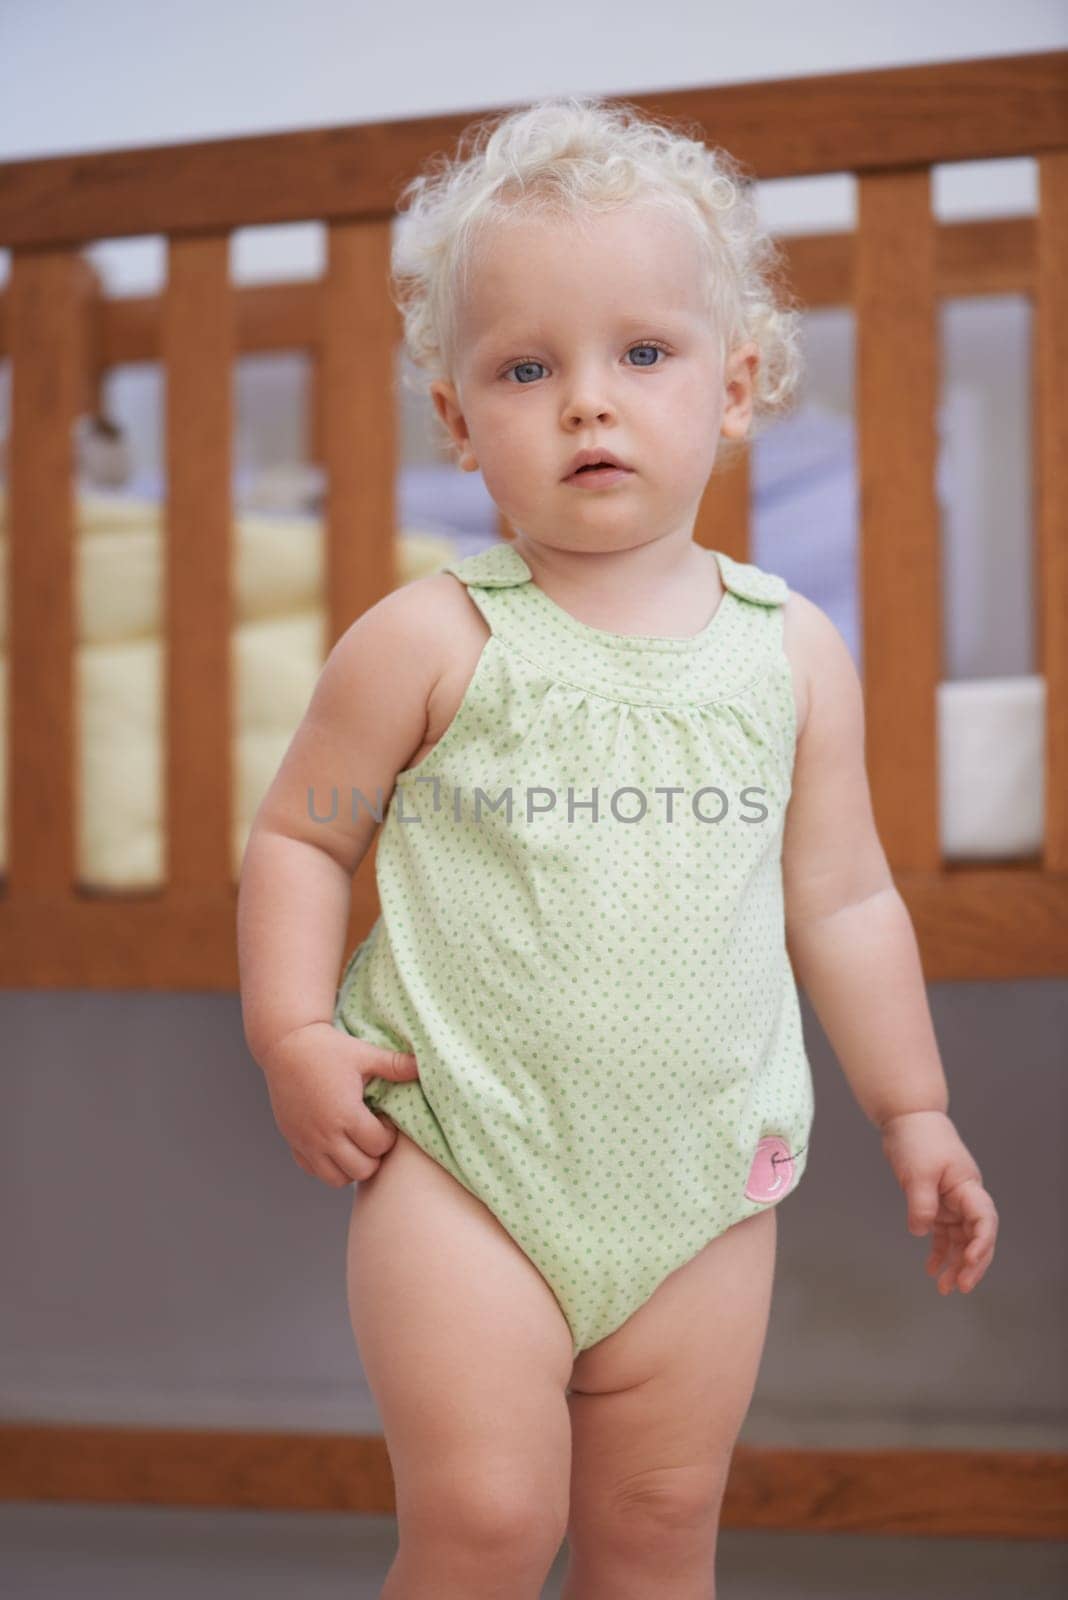 Portrait, baby and kid at nursery in home, adorable and cute innocent child alone in house. Young blonde toddler, health and childhood development for growth of girl standing by crib in Switzerland.